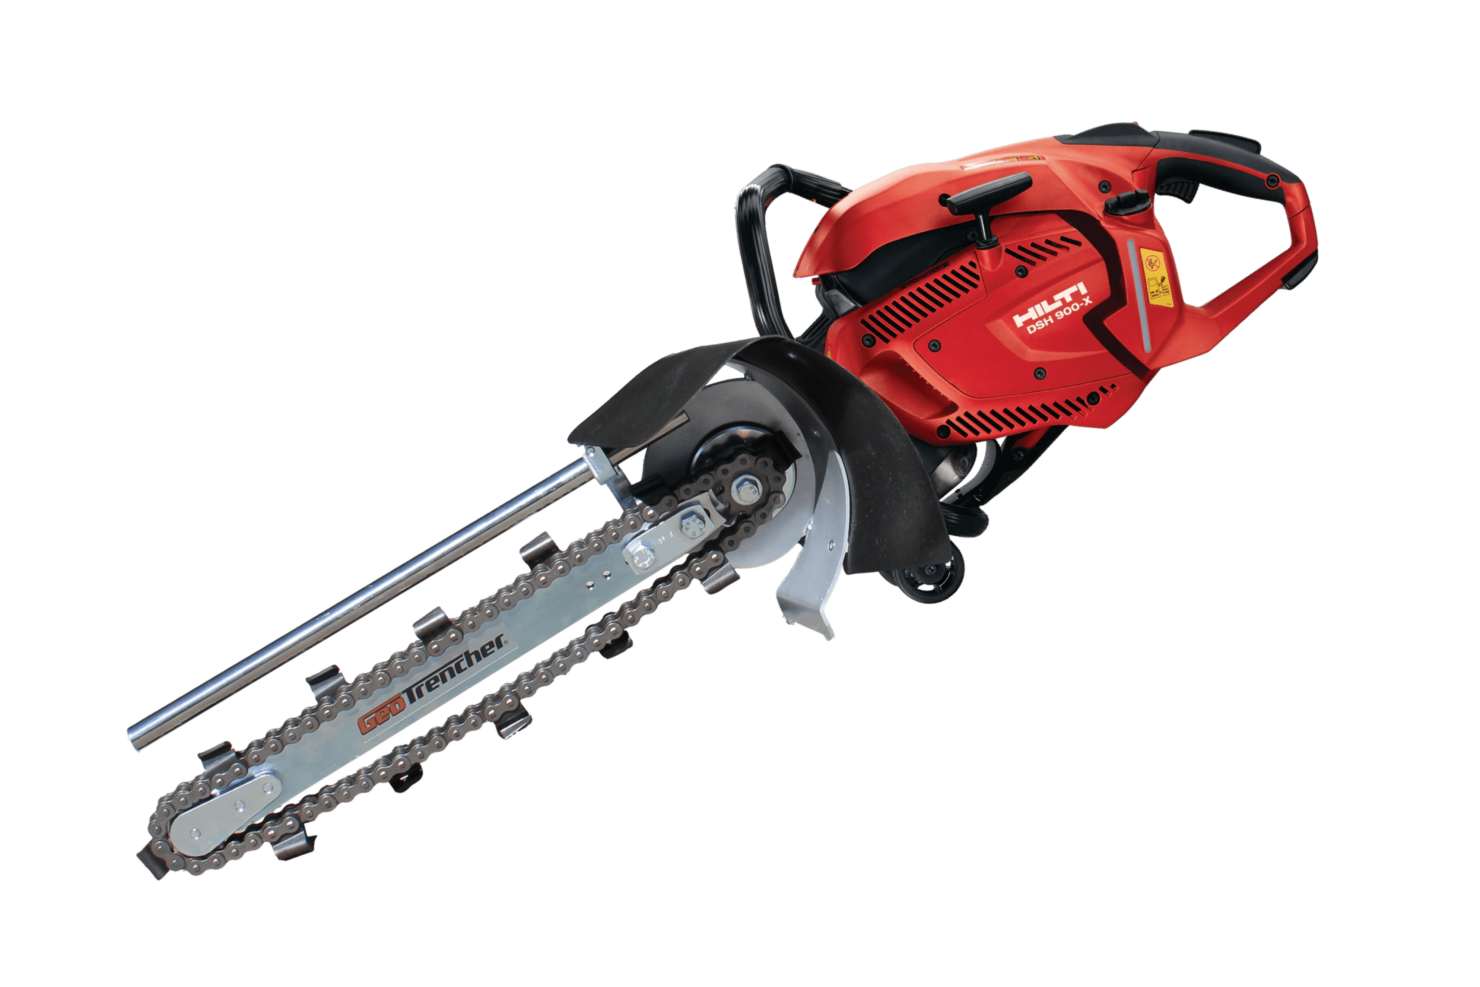 GEOTRENCHER WITH HILTI DSH 900 X POWERHEAD 1